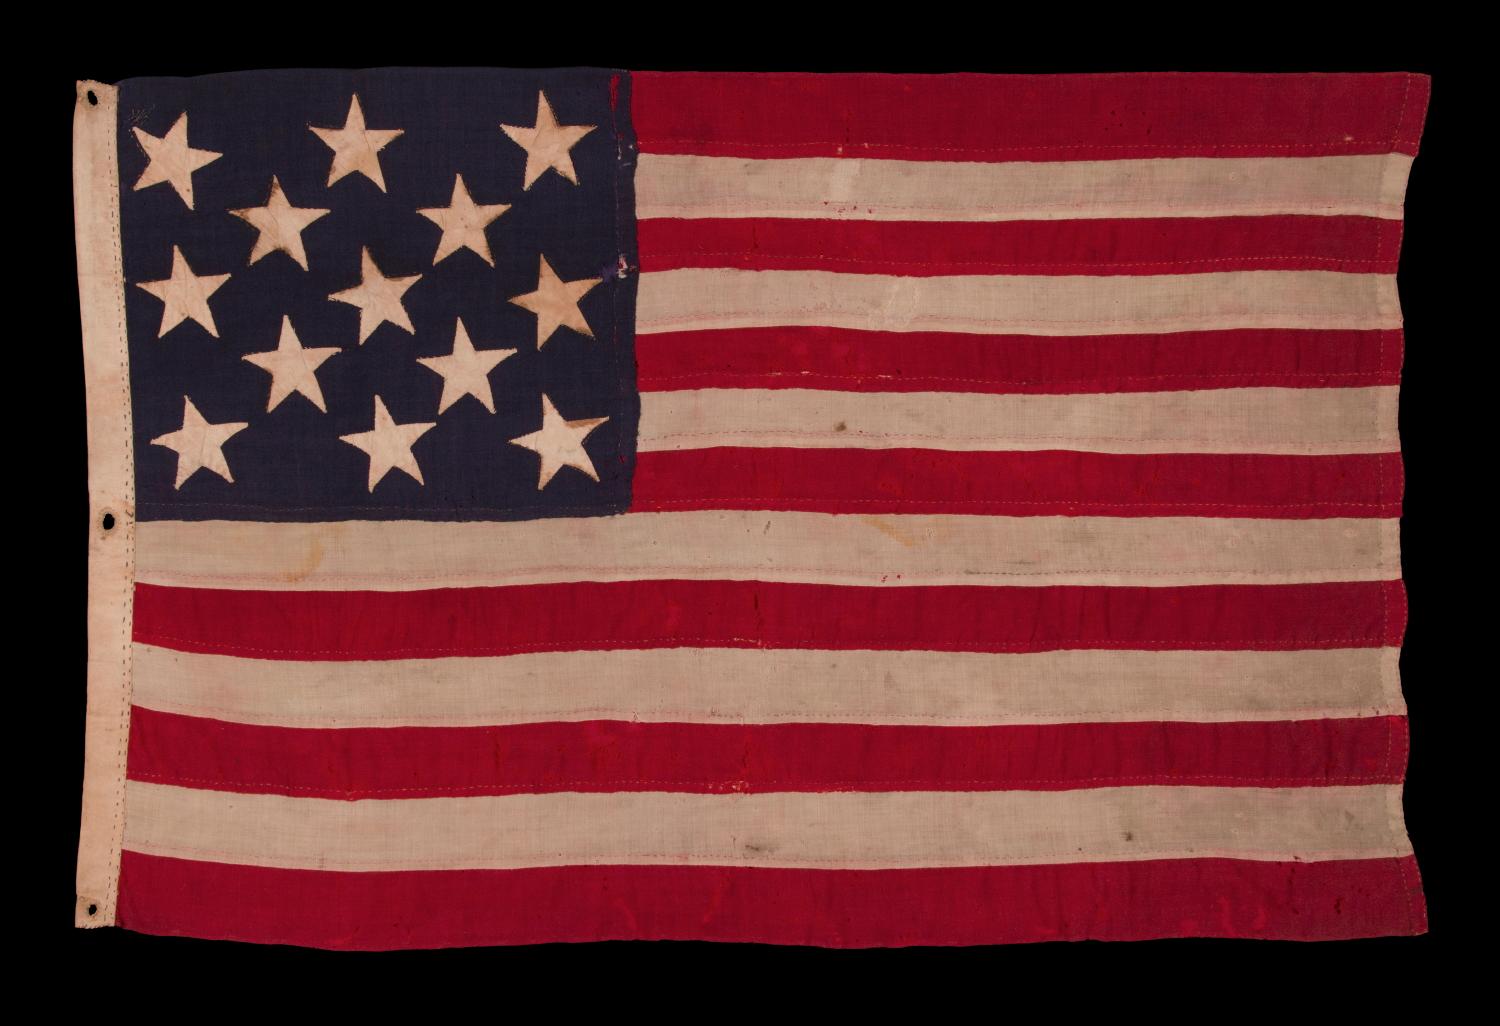 ENTIRELY HAND-SEWN, 13 STAR, U.S. NAVY SMALL BOAT ENSIGN, CA 1882-1890 

13 star American national flag of the type used by the U.S. Navy on small boats in the latter 19th and early 20th centuries. The Navy produced signals in several locations,